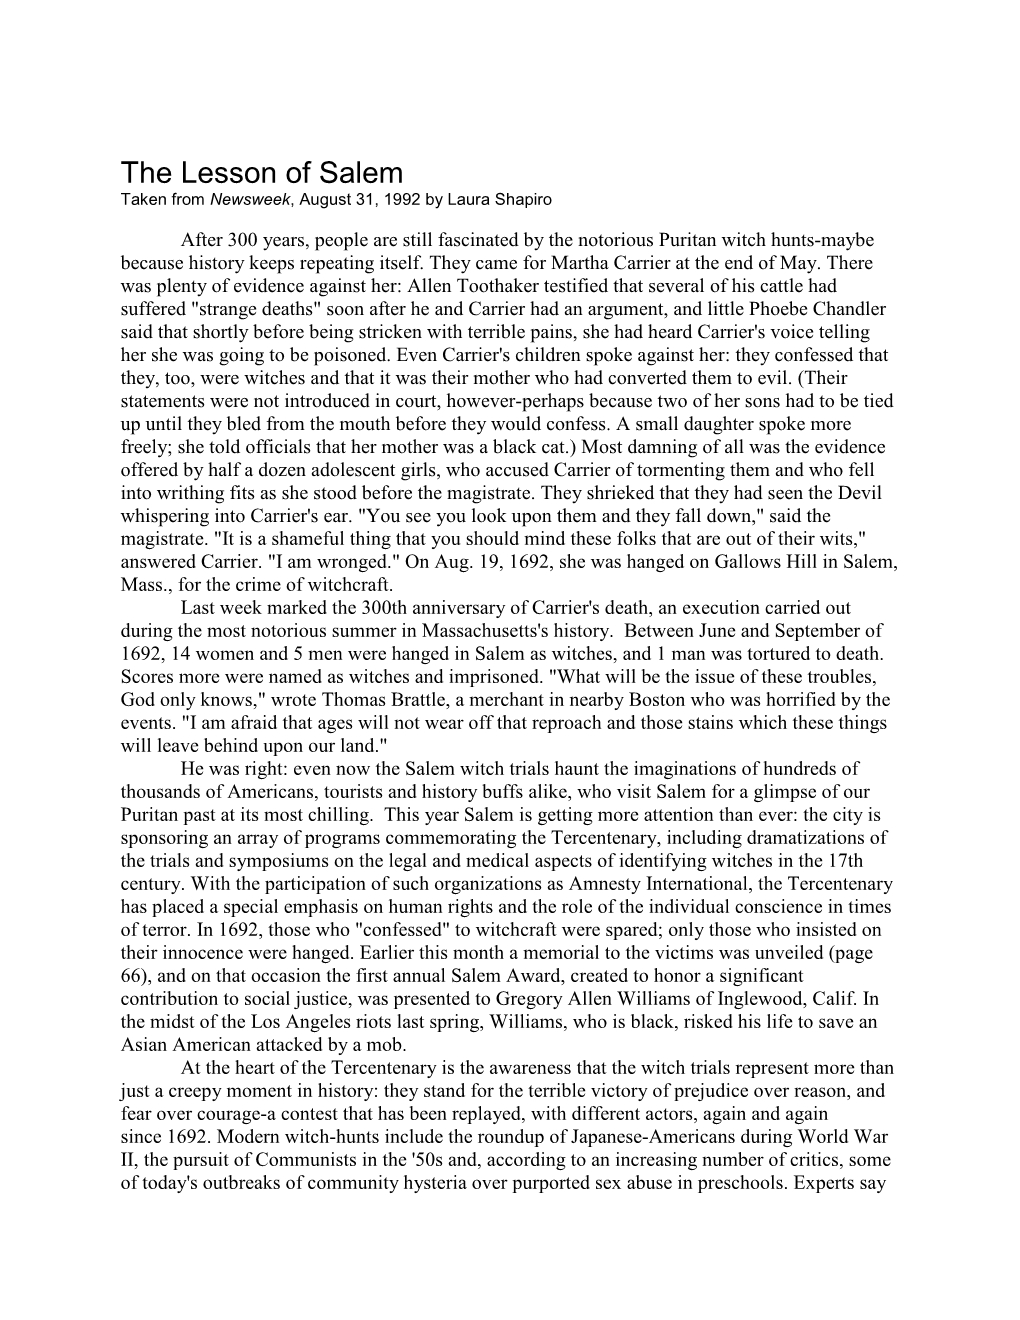 The Lesson of Salem Taken from Newsweek, August 31, 1992 by Laura Shapiro